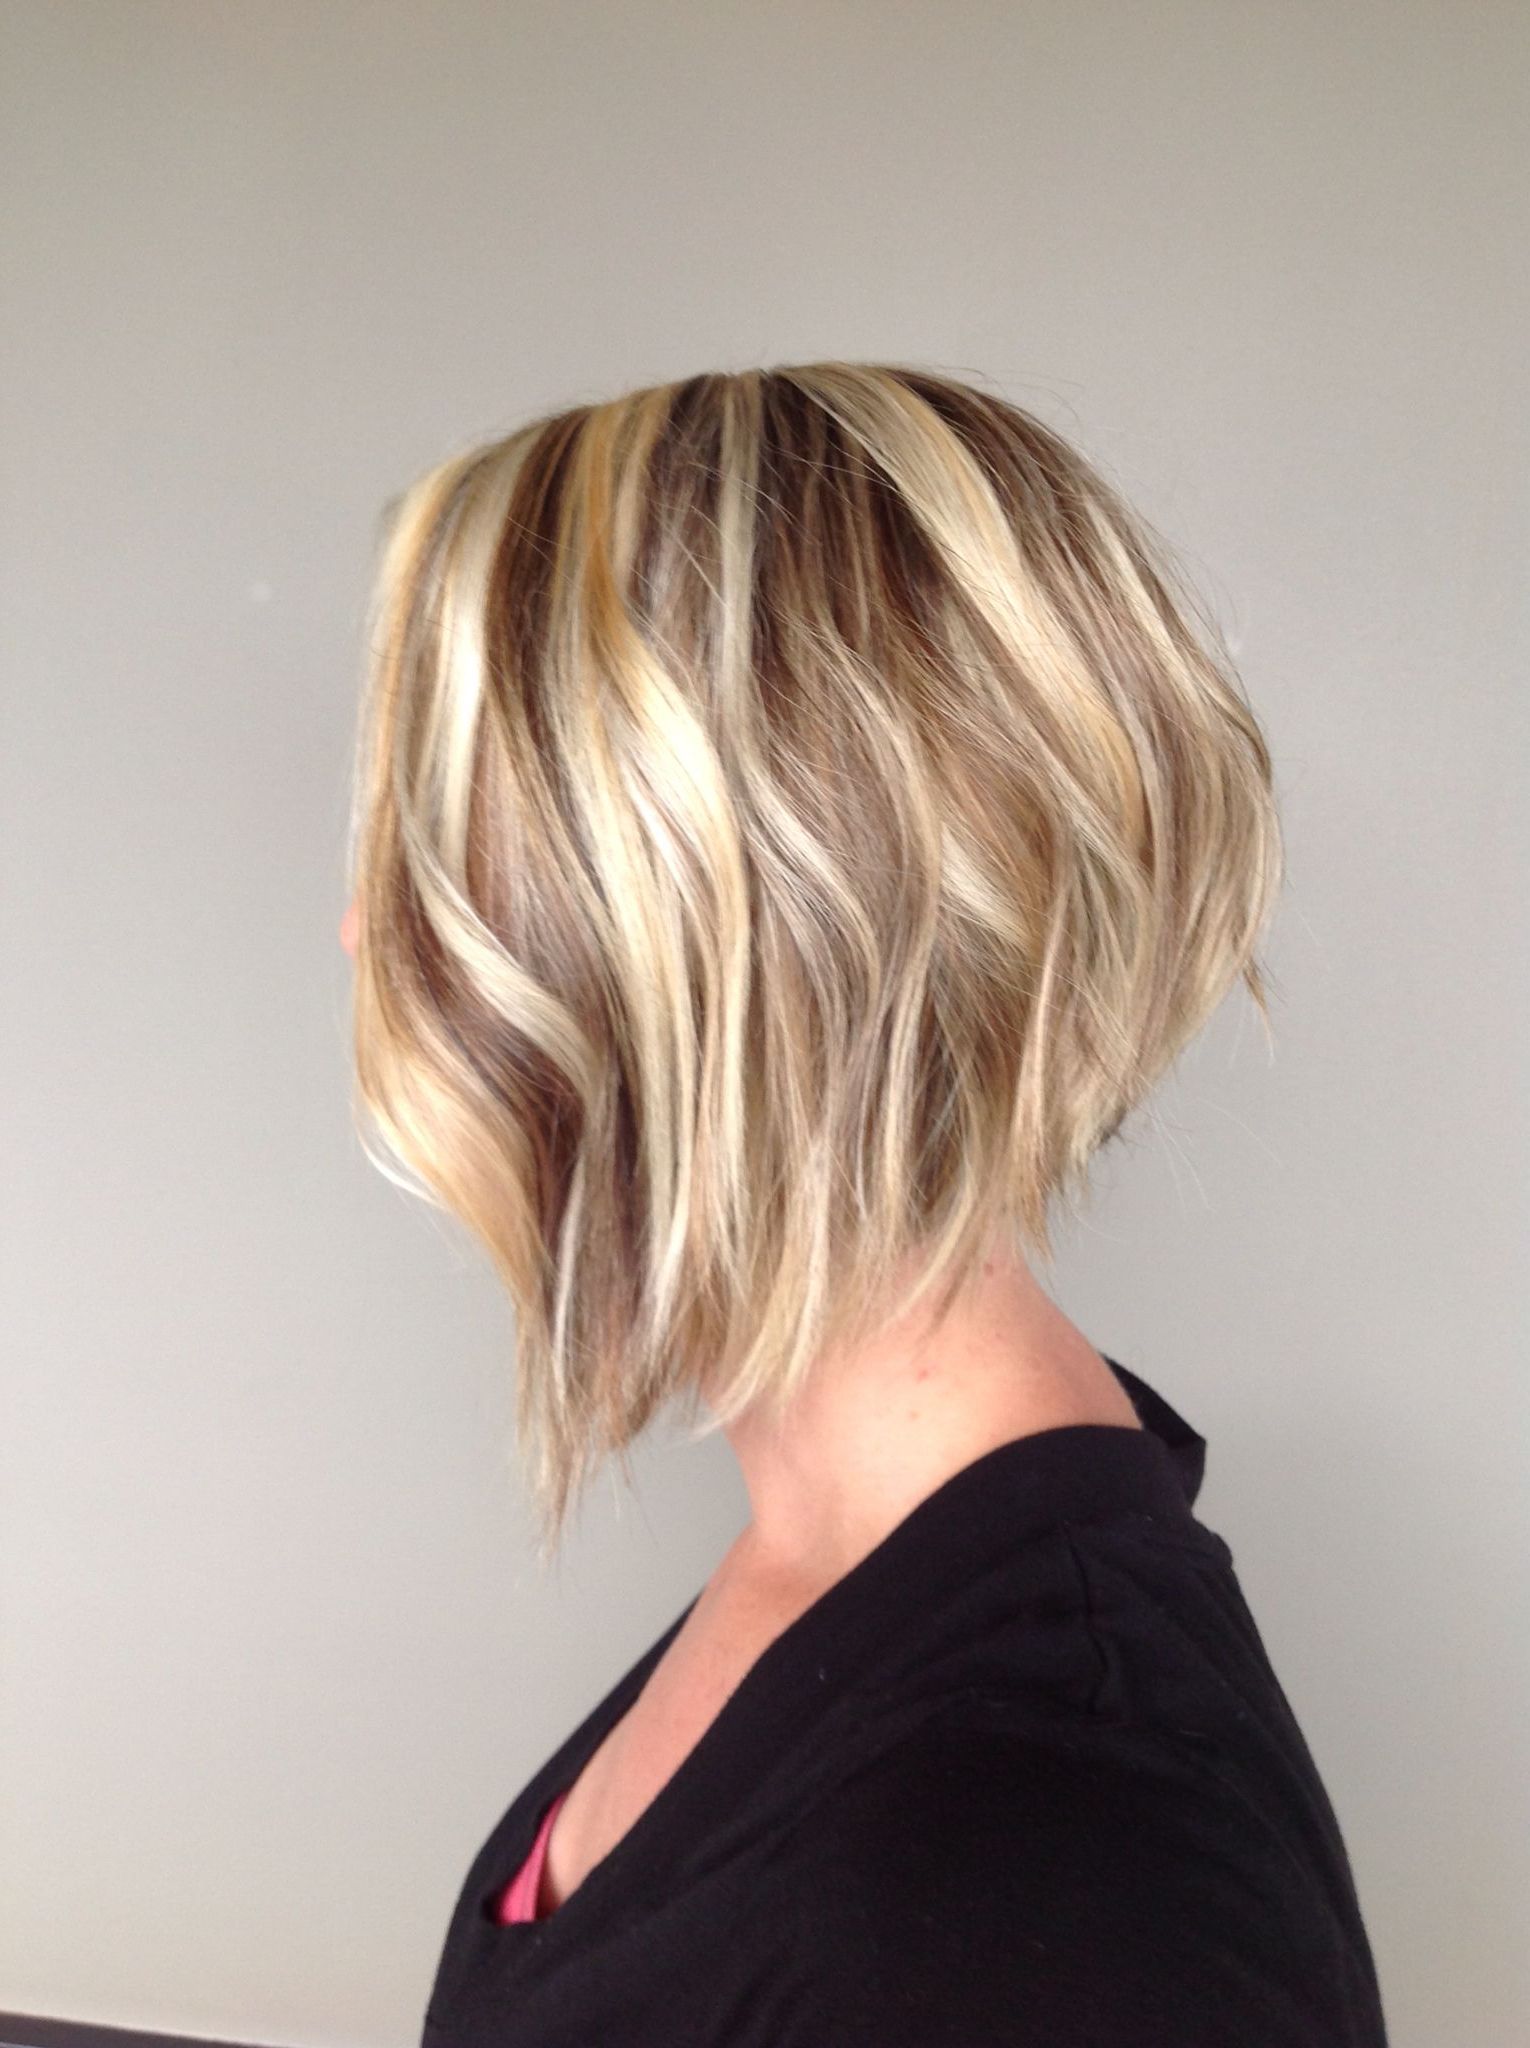 Hair Styles, Hair For 2018 Long Angled Bob Hairstyles With Chopped Layers (View 1 of 20)